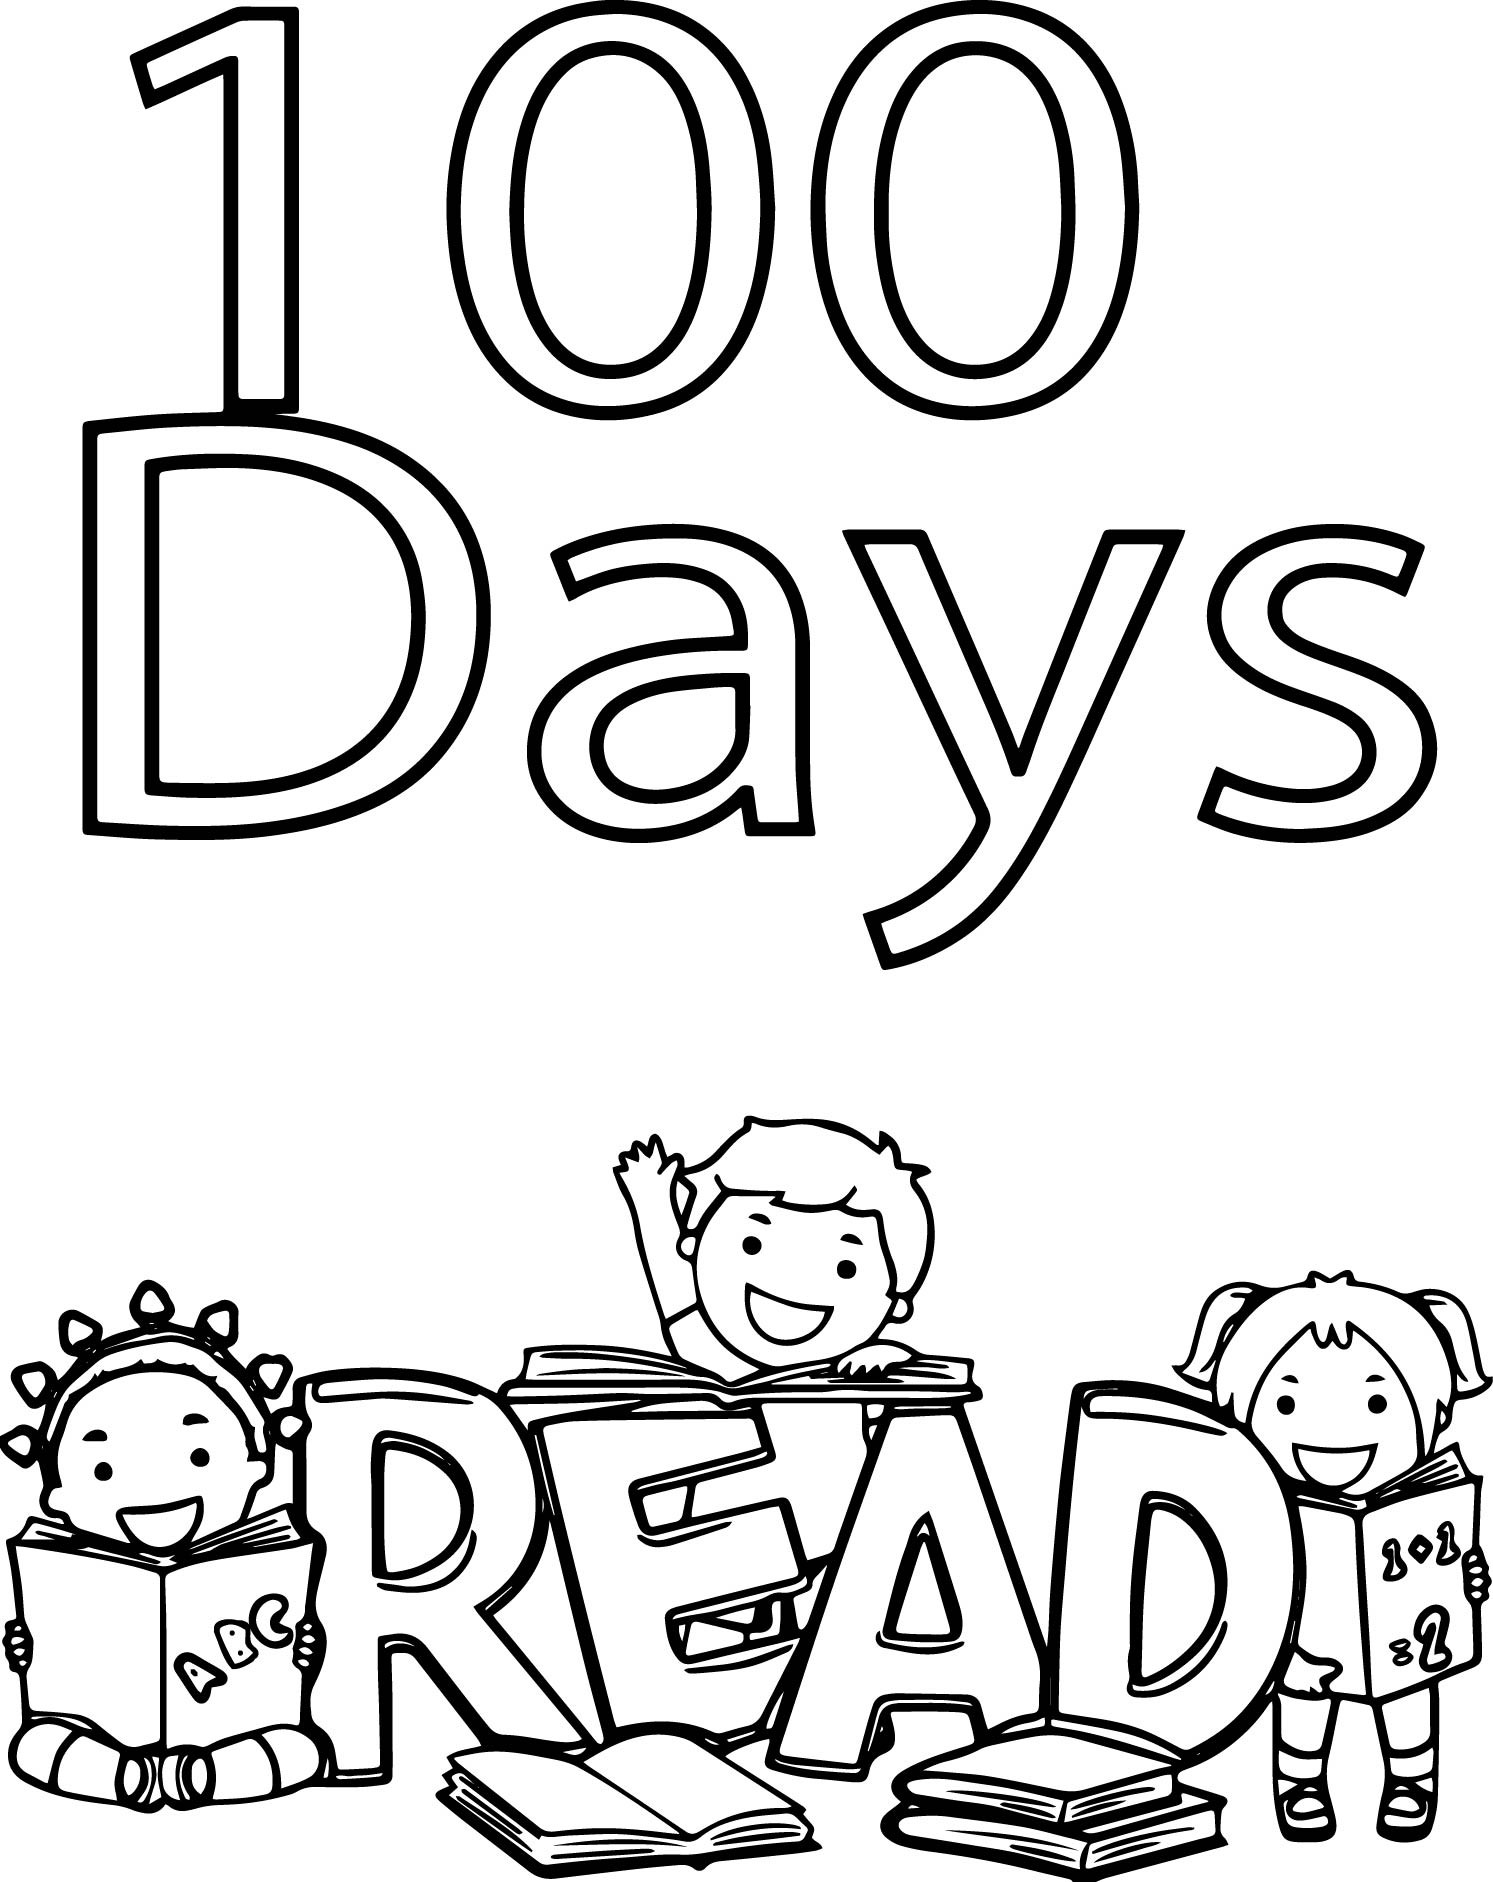 100 Days Coloring Pages
 100 Days School Read Coloring Page